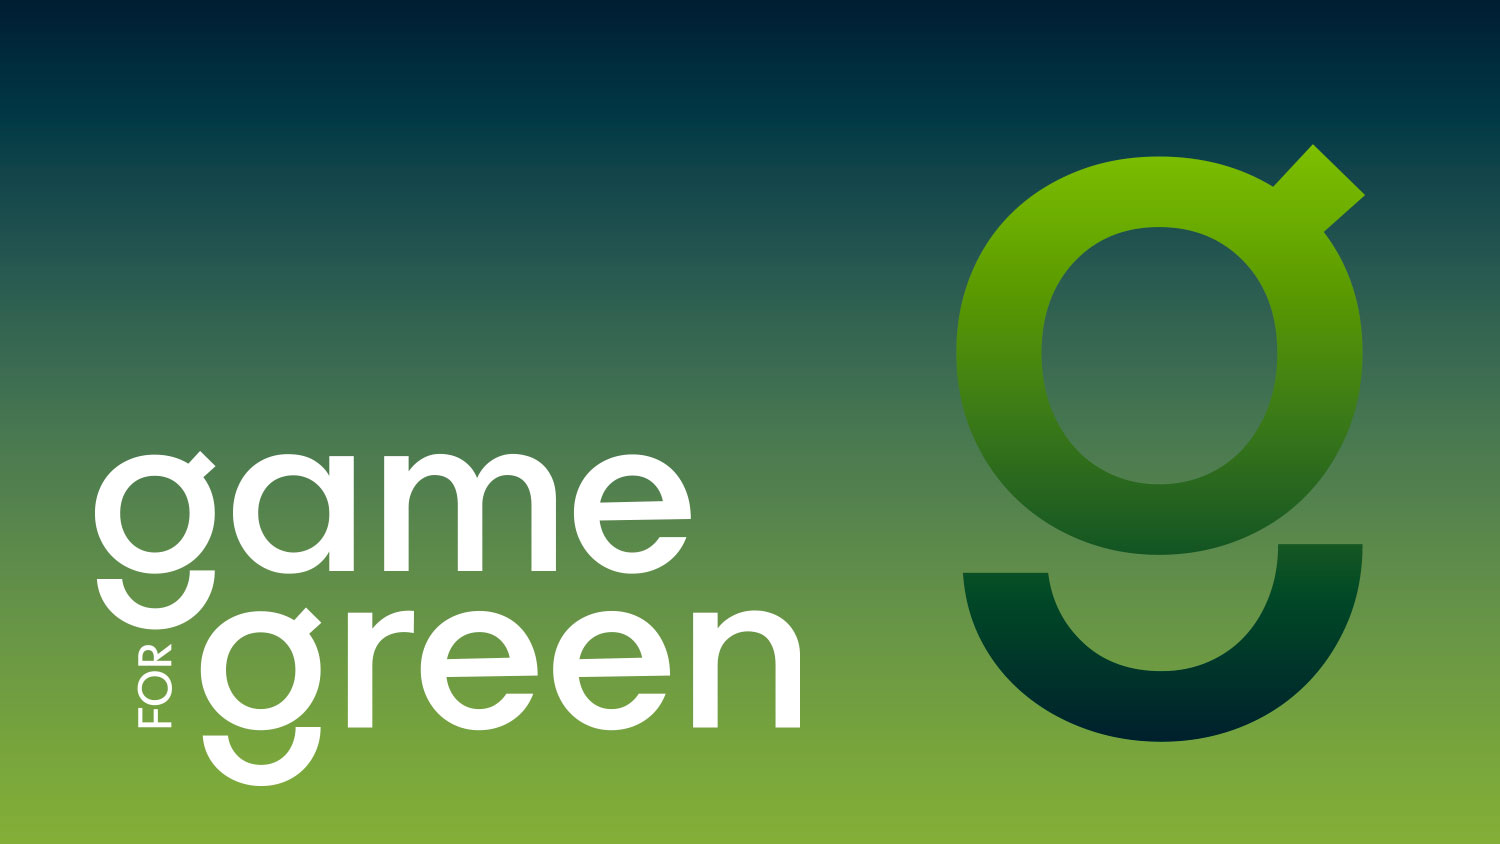 Game-for-green-logo-graphic-element